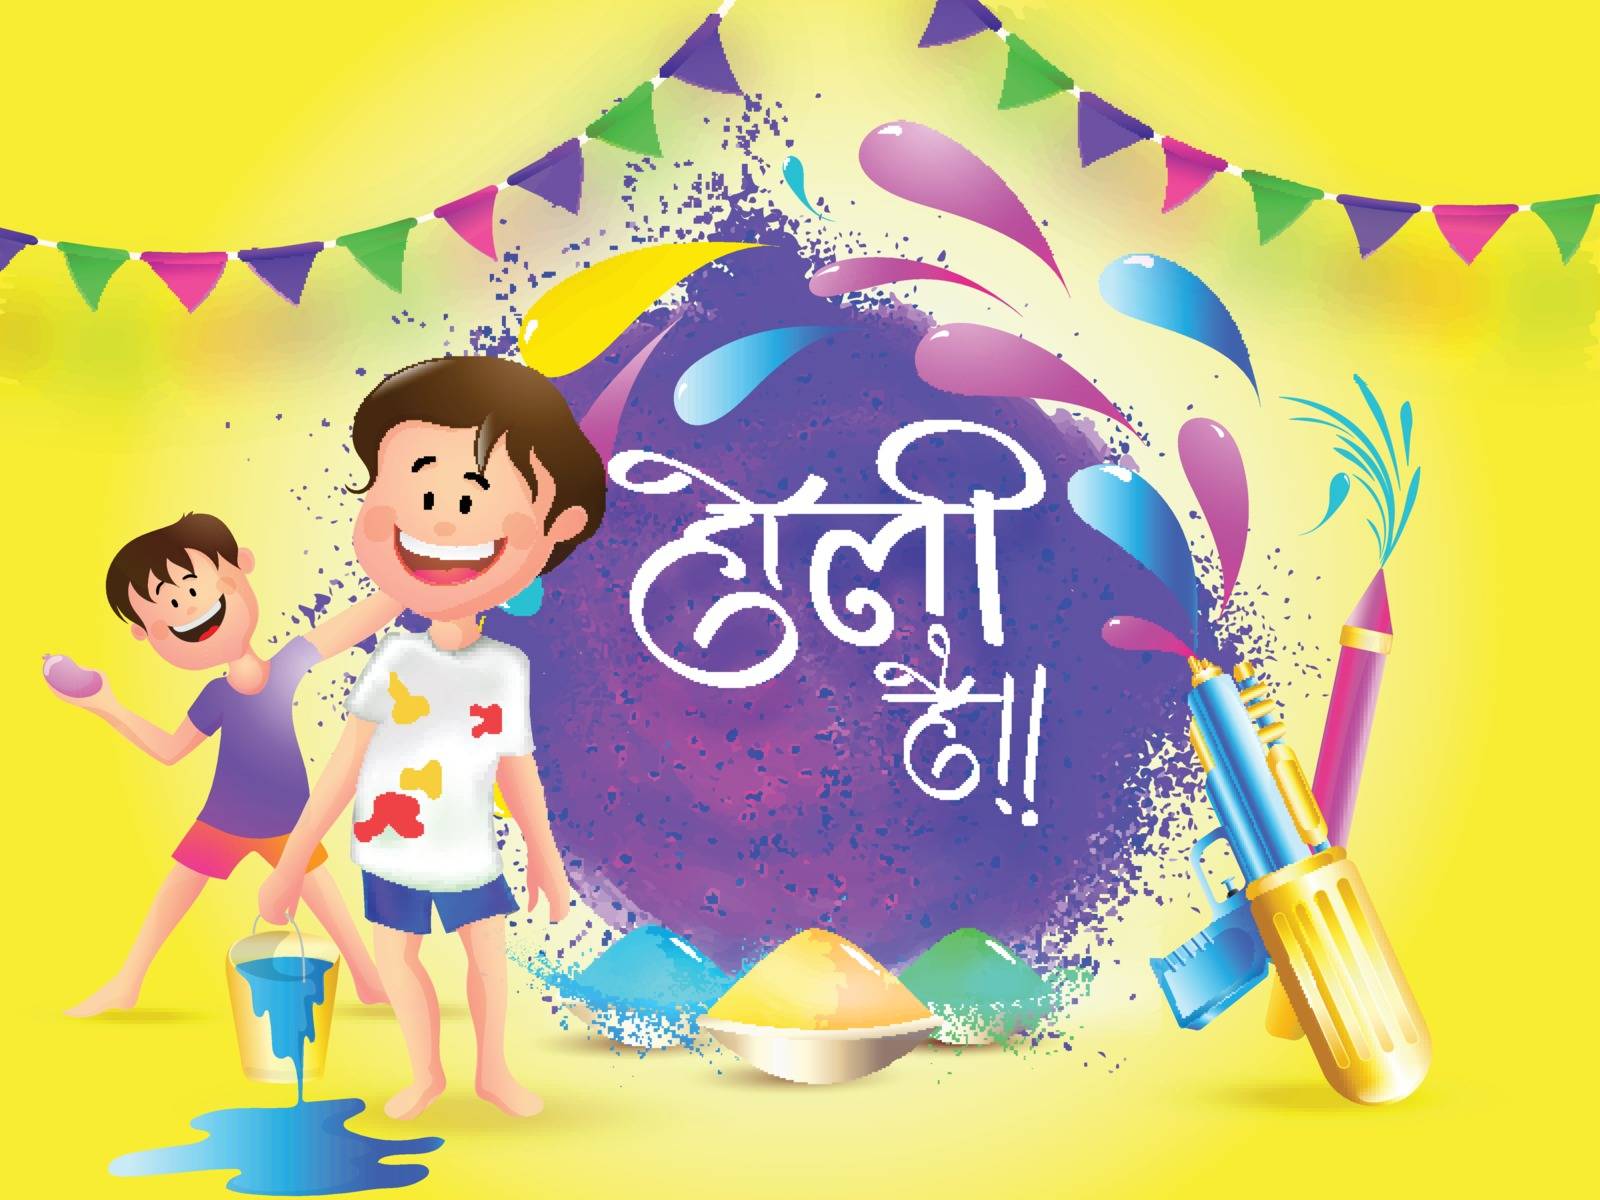 Cute little boys playing with colors on occasion of indian festival, creative hindi text of Holi Hai (its Holi) on powder colorful abstract background.